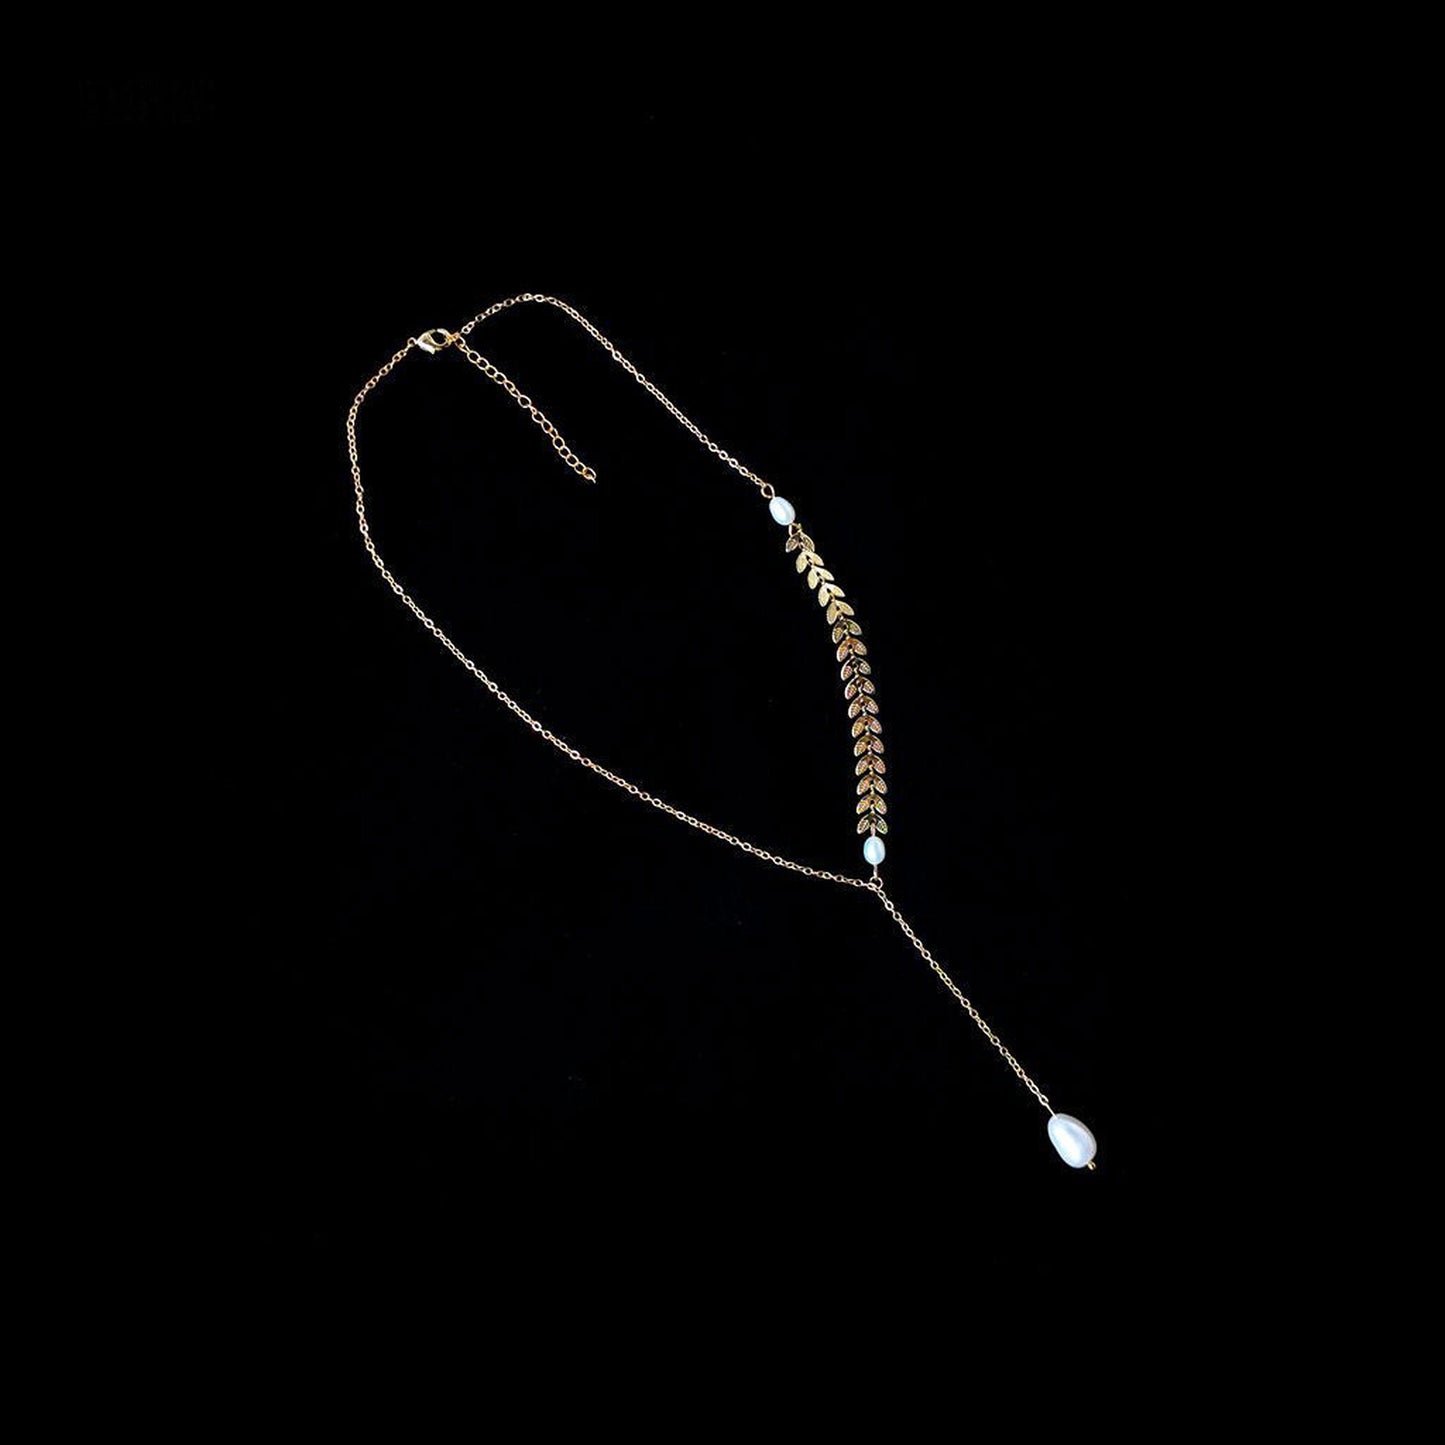 14K Gold Real Pearl Necklace, 2 Way Y Lariat Necklace, Ear of Wheat Necklace, Olive Leaf Vine Necklace, Dainty Curving Bar Layering Necklace